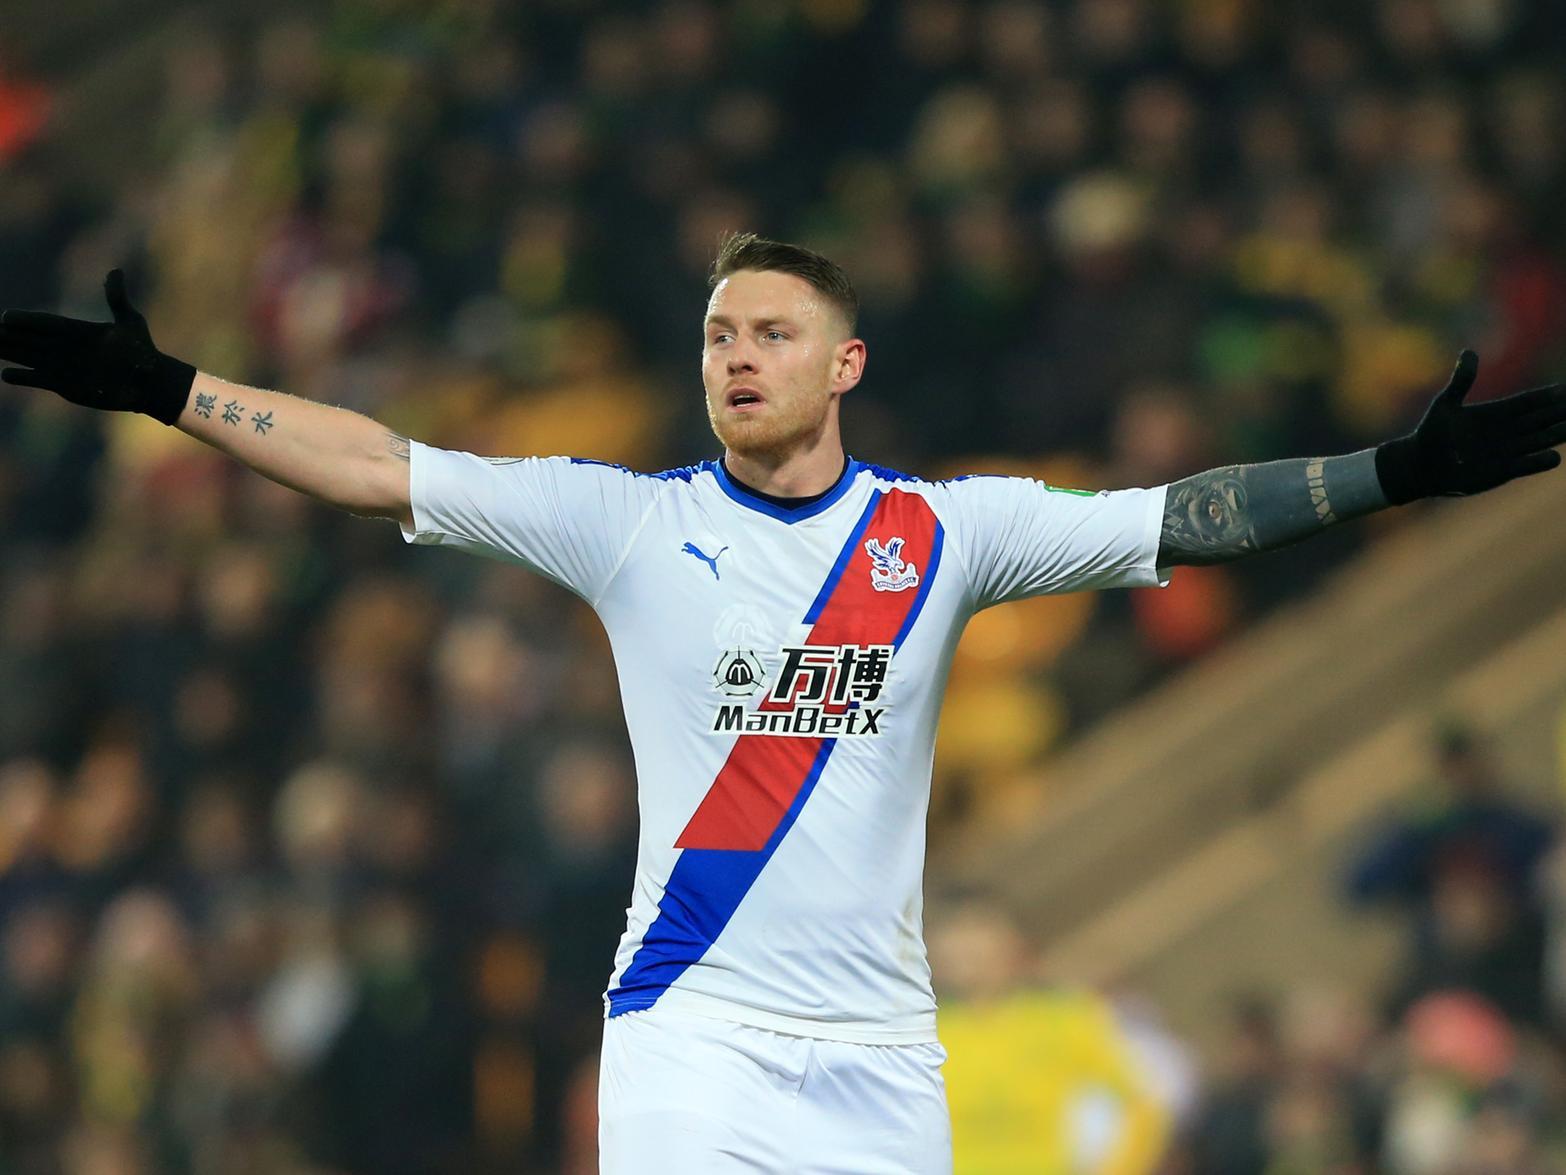 Sheffield Wednesday are understood to be interested in signing Crystal Palace striker Conor Wickham on loan, and a deal looks likely after Cenk Tosun completing a switch to the Eagles. (Sheffield Star)